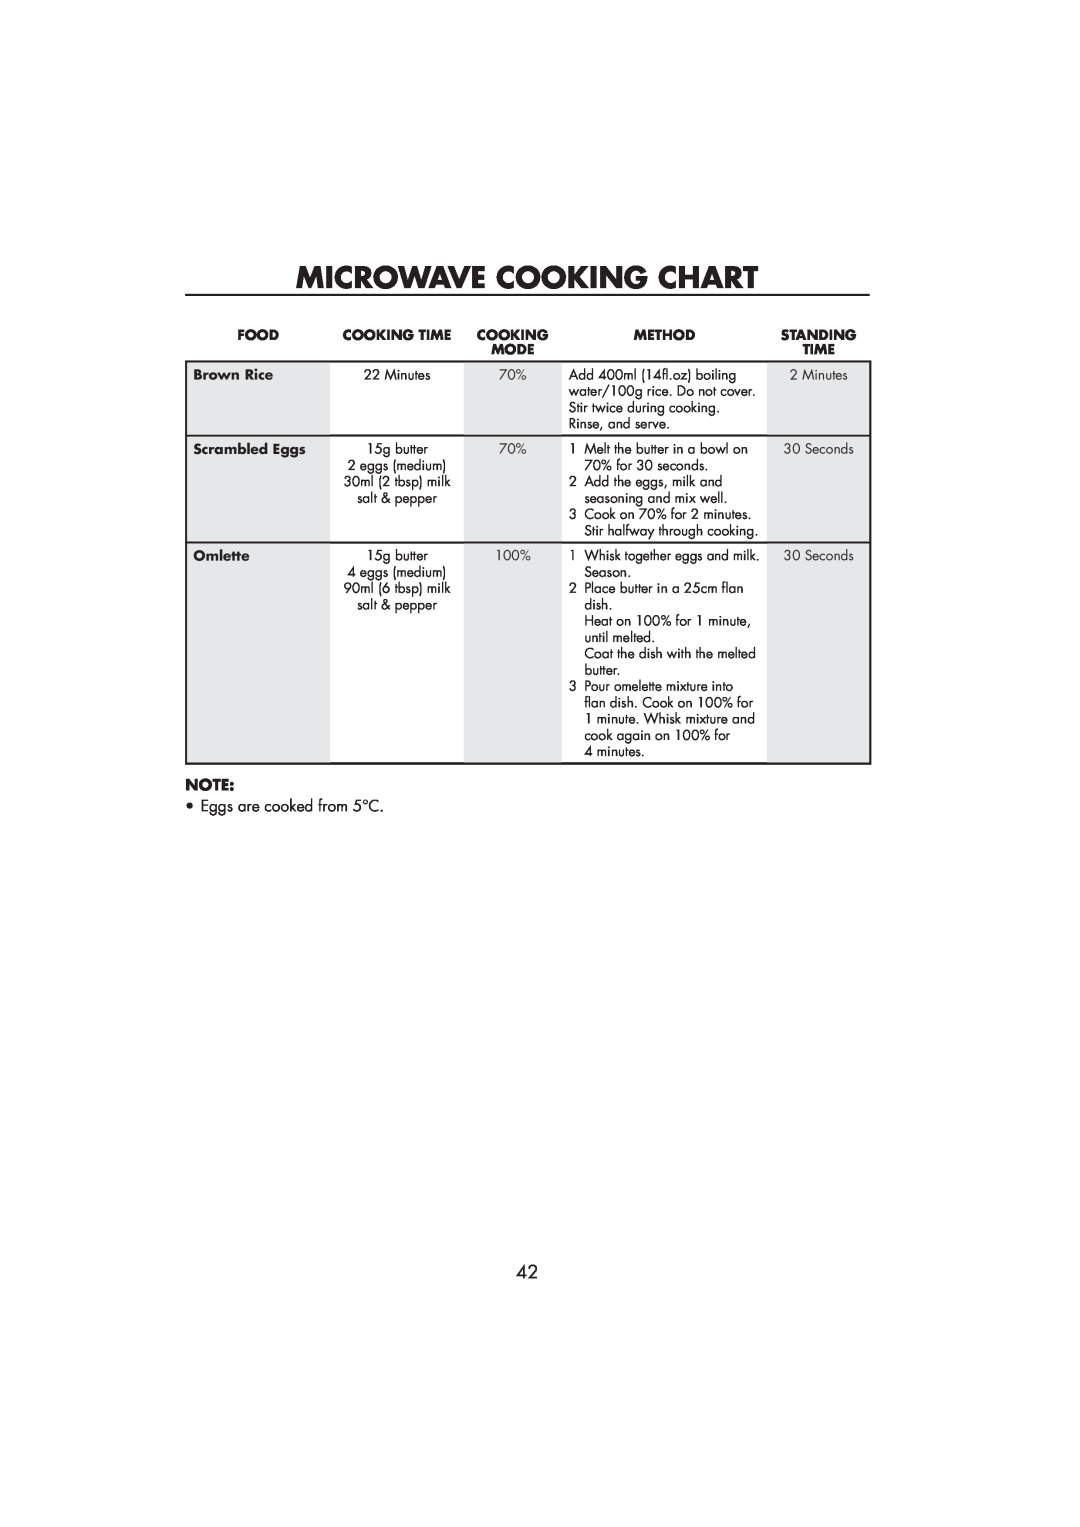 Sharp R-890SLM operation manual Microwave Cooking Chart, Eggs are cooked from 5C 